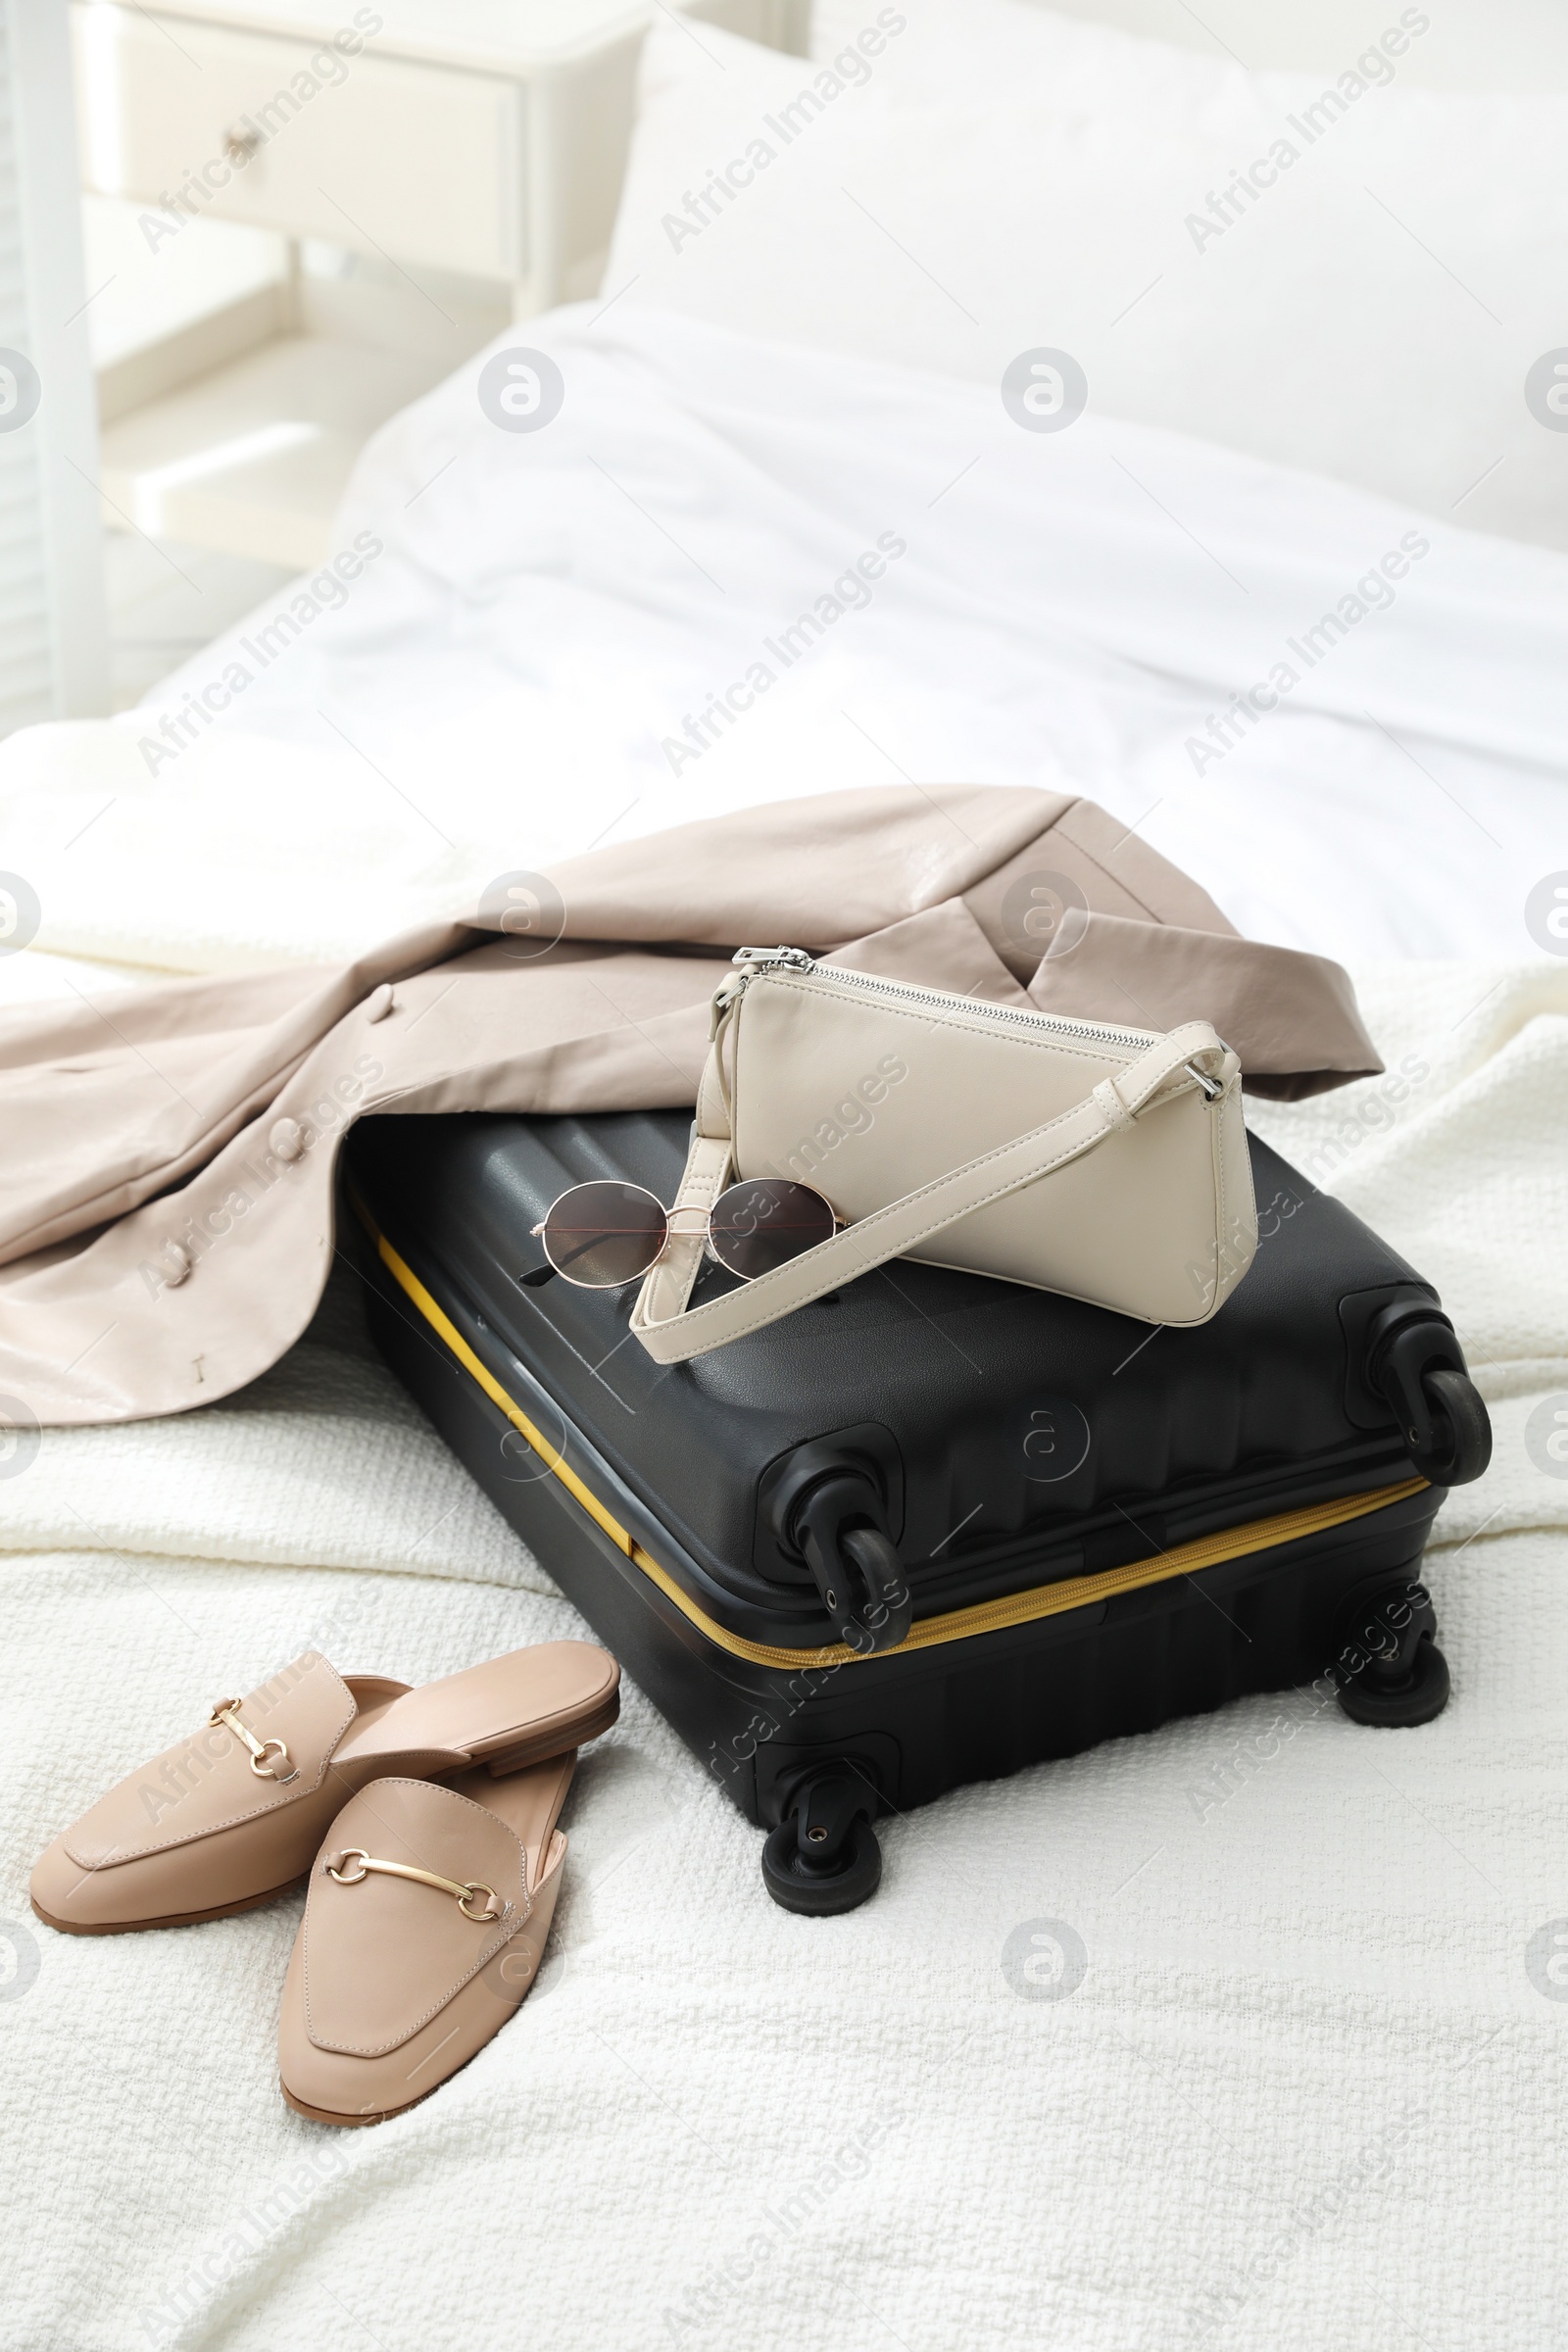 Photo of Suitcase packed for trip, shoes, jacket and fashionable accessories on bed